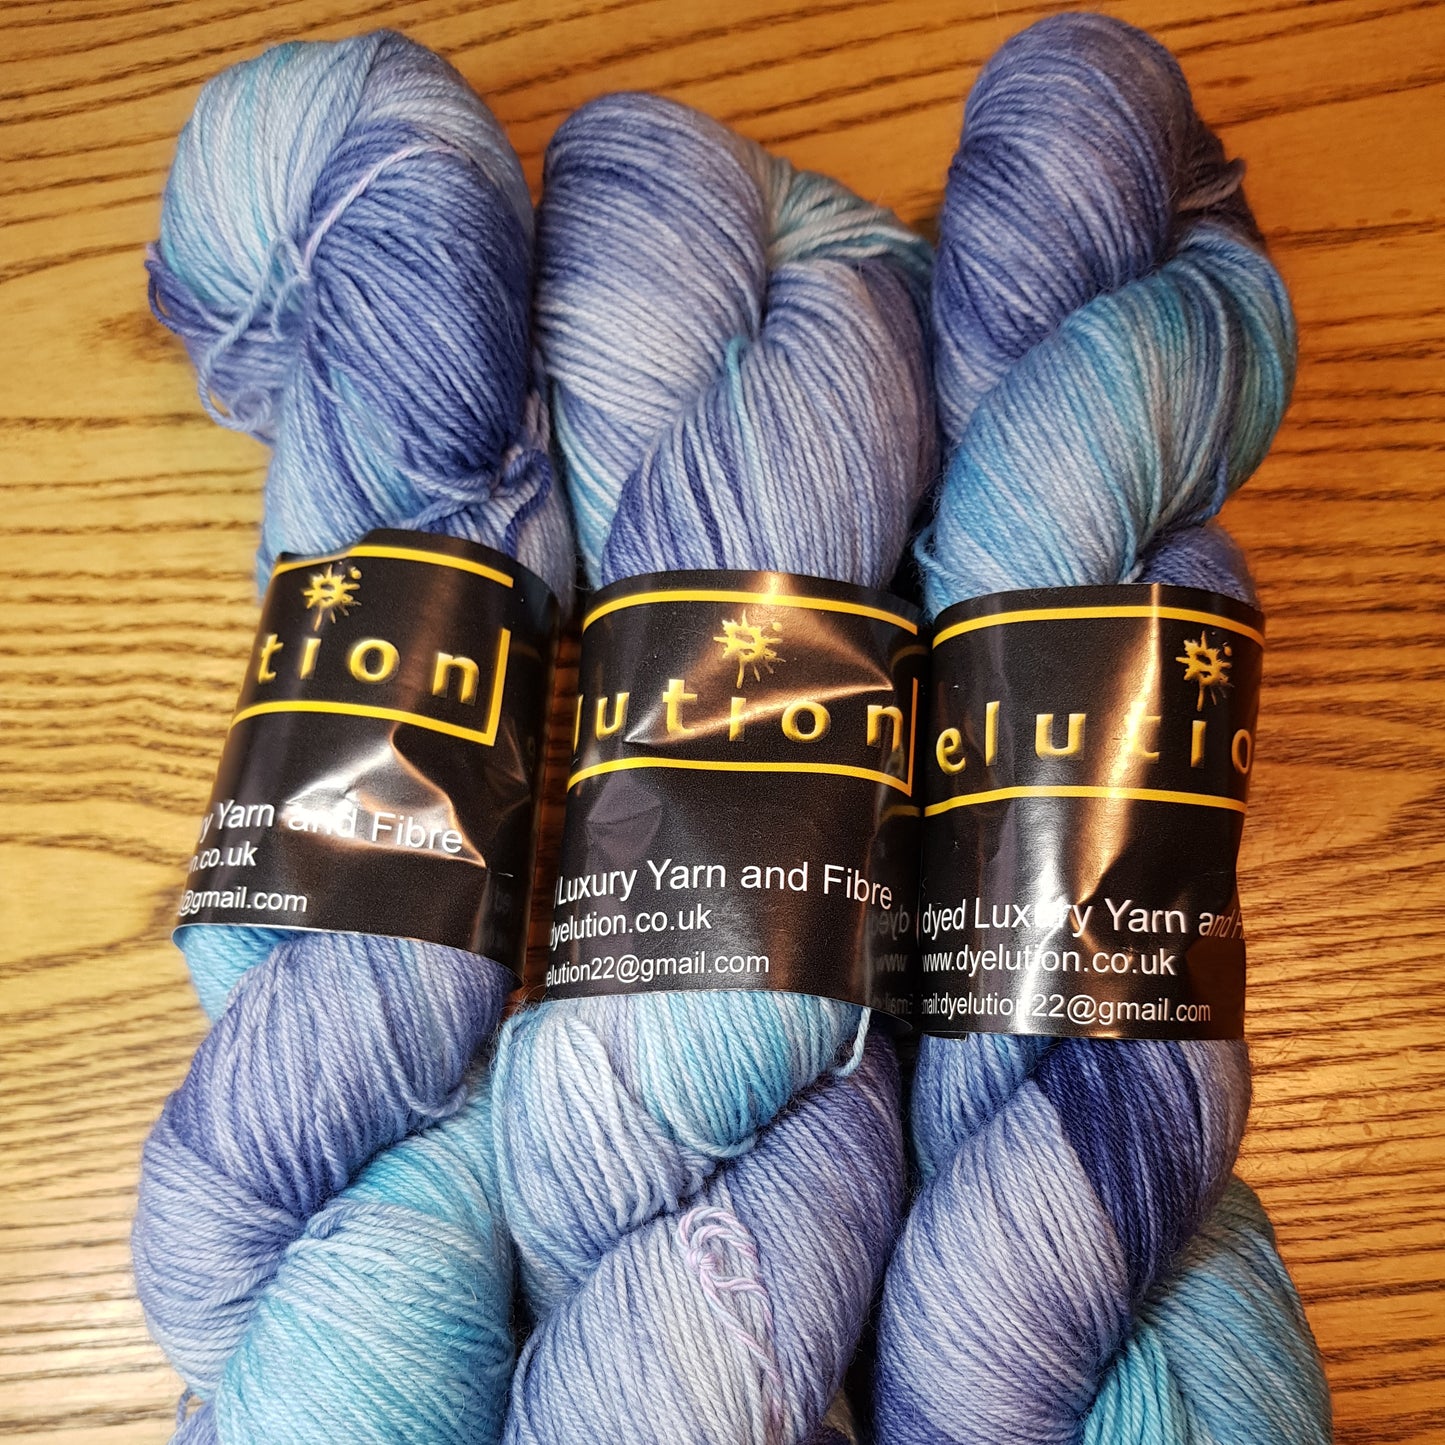 100G hand dyed Bluefaced Leicester/Nylon High Twist sock yarn - "Surfs Up" - **SALE**